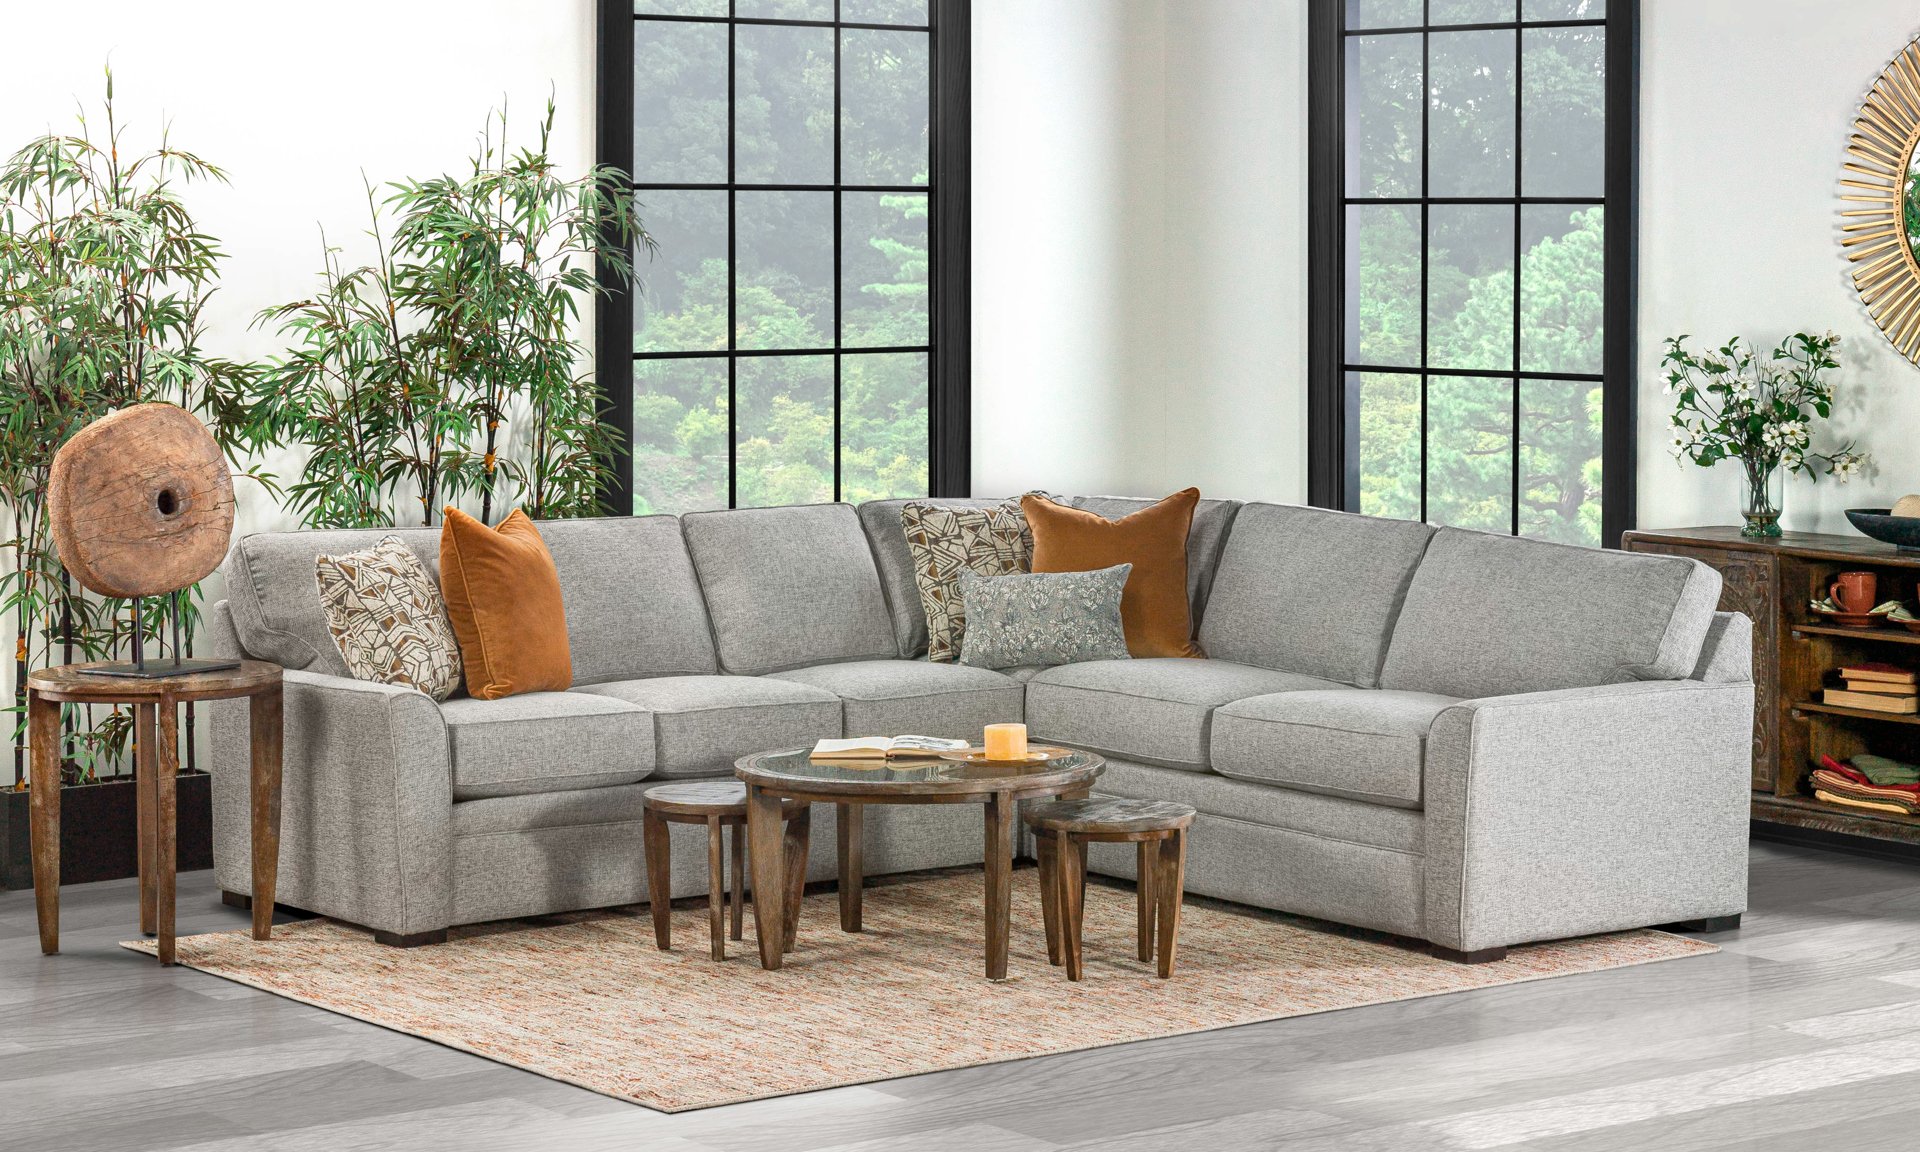 Neutral colored sectional in a living room that would look great in any home.